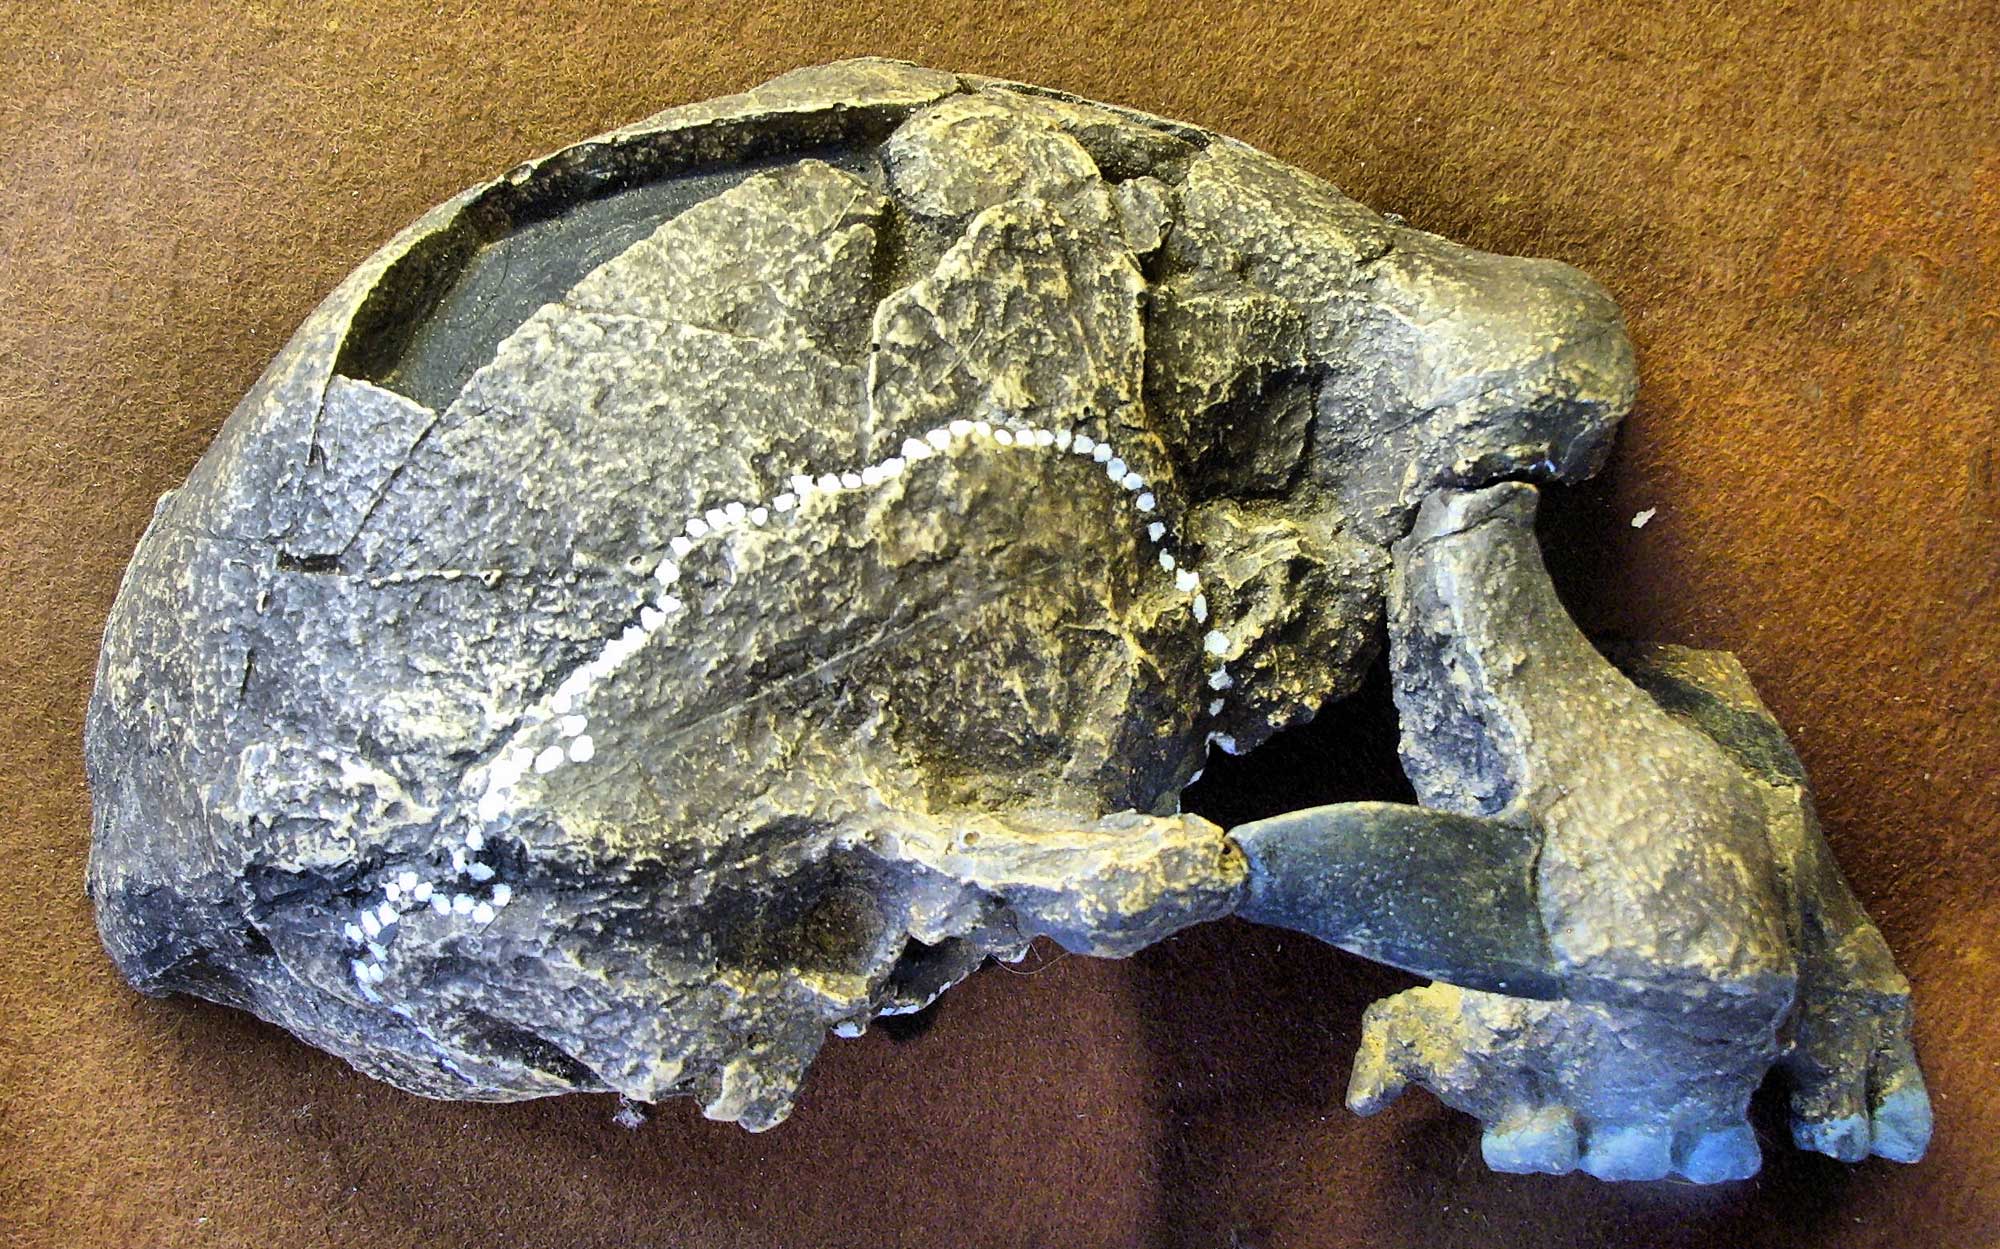 Photograph of a replica of a skull of Homo erectus from Java. The photo shows the skull from the side. In looks similar to the skull of a modern human, although the top of the head is lower. The bottom jaw of the skull is missing.